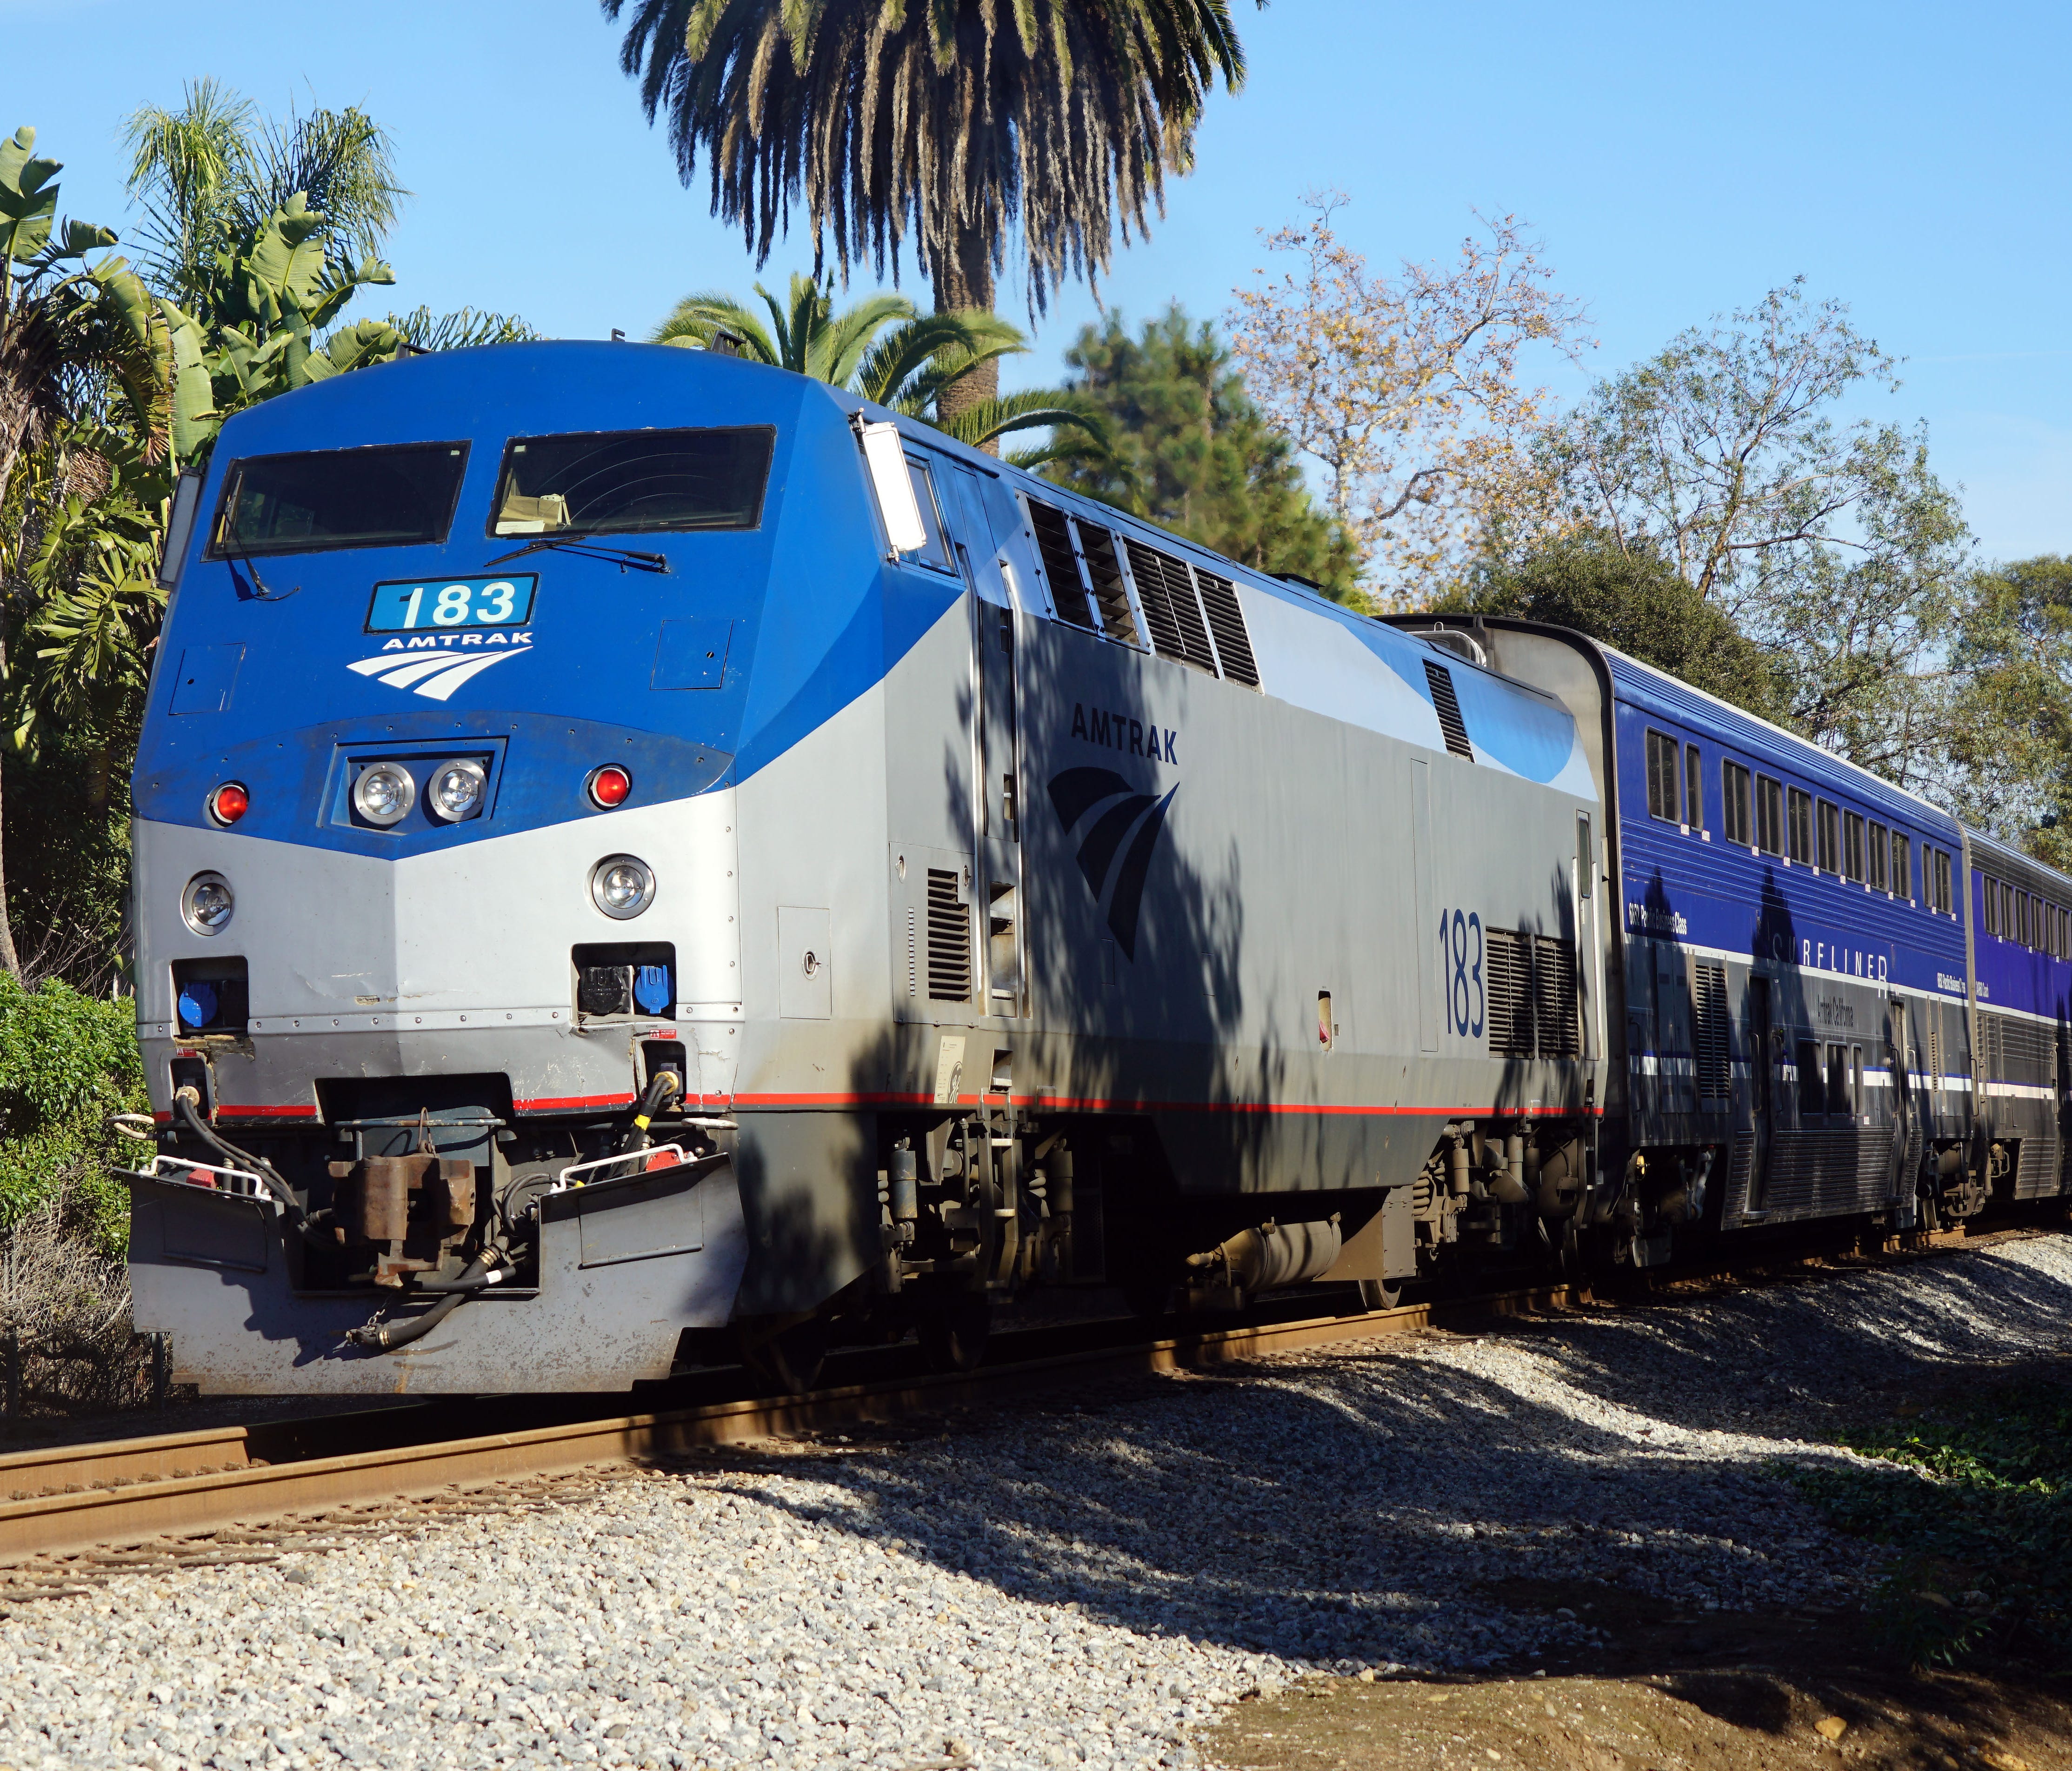 Earn double points this spring with Amtrak.